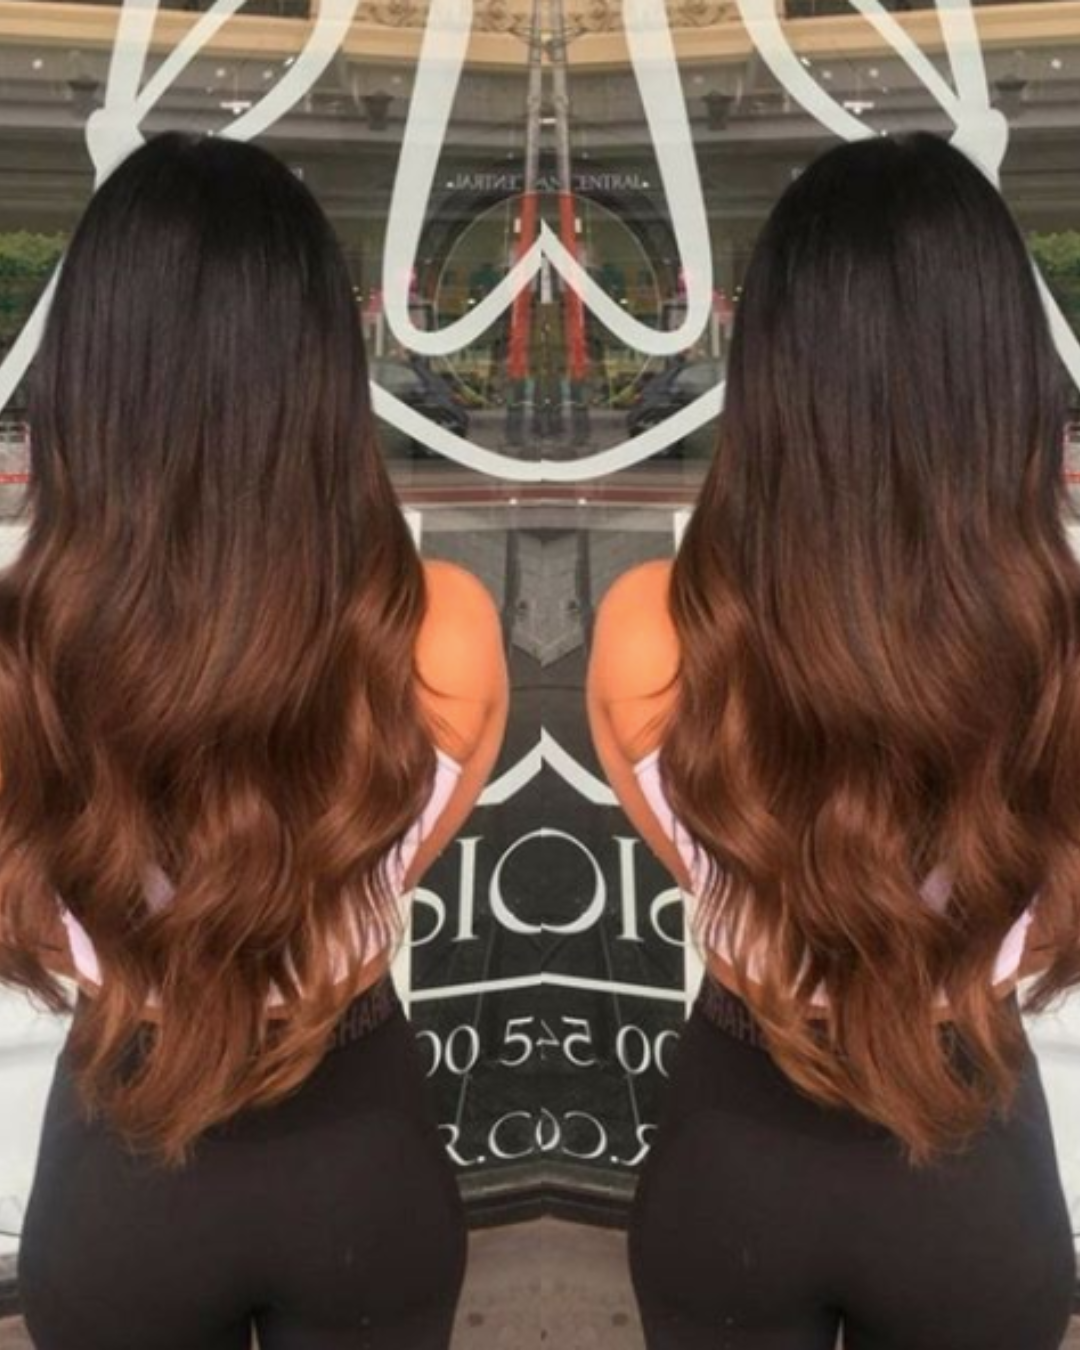 Brownie Points Balayage Halo Hair Extensions - Kiki Hair Extensions